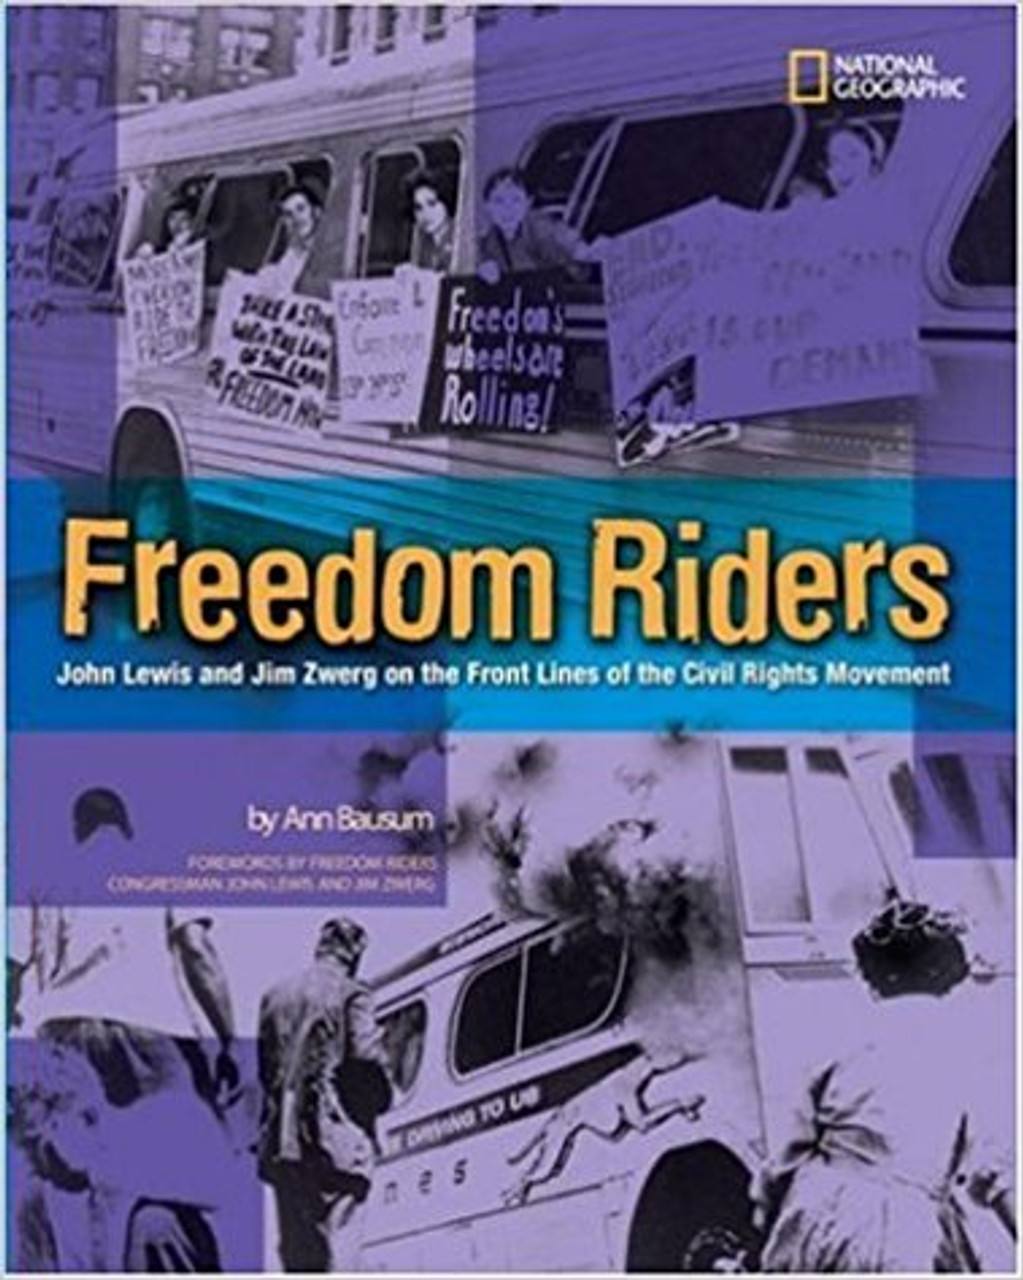 Freedom Riders: John Lewis and jim Zwerg on the Front Line of the Civil Rights Movement by Ann Bausum